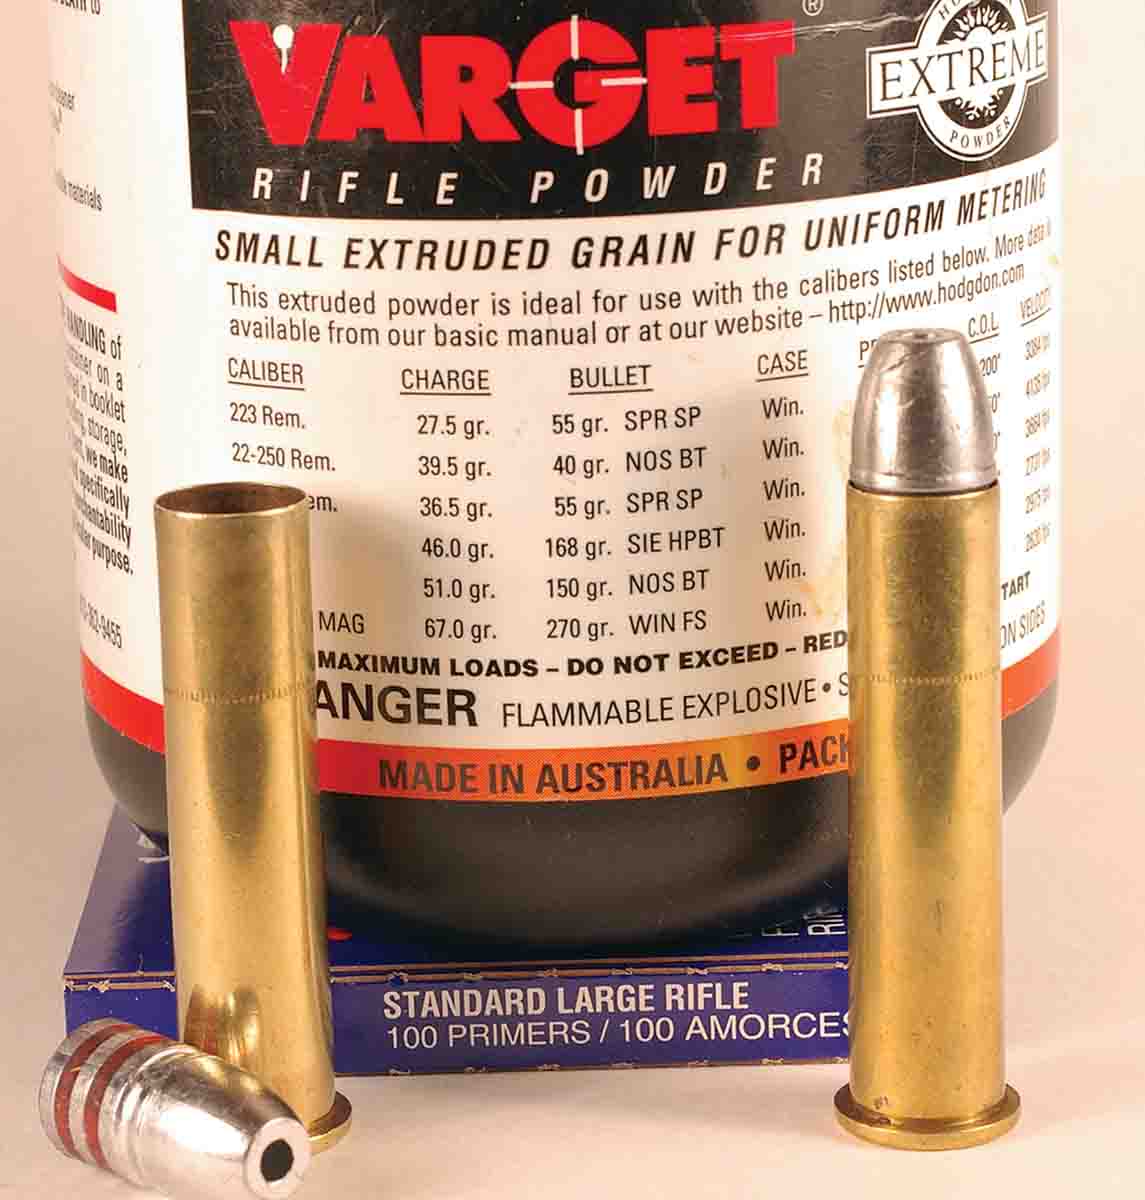 The bullets shot well using Varget powder, but lighter charges of Varget produced high extreme velocity spreads.